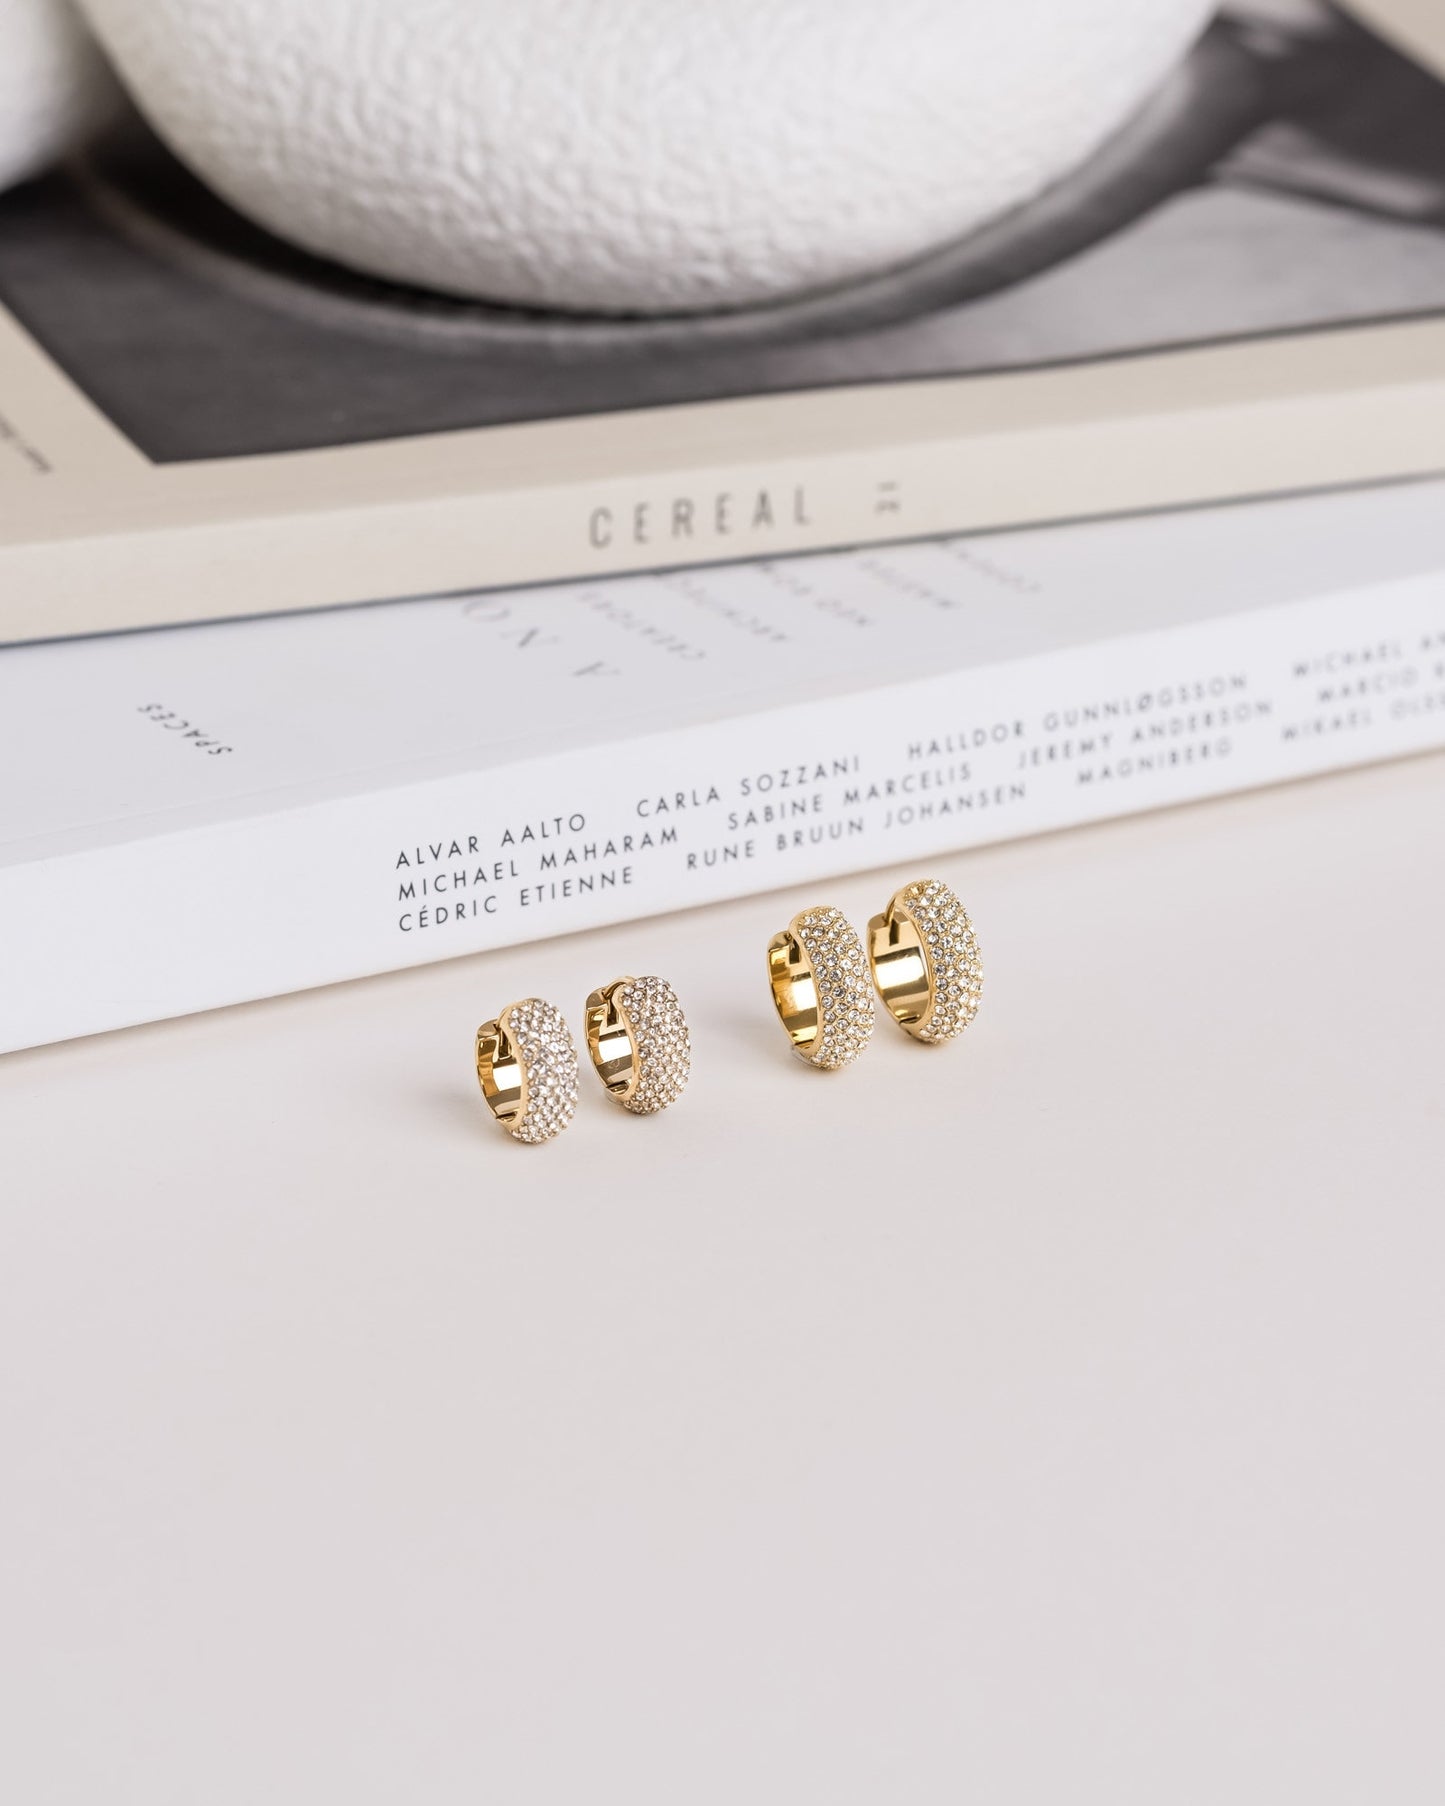 Amour Gold Hoops Small